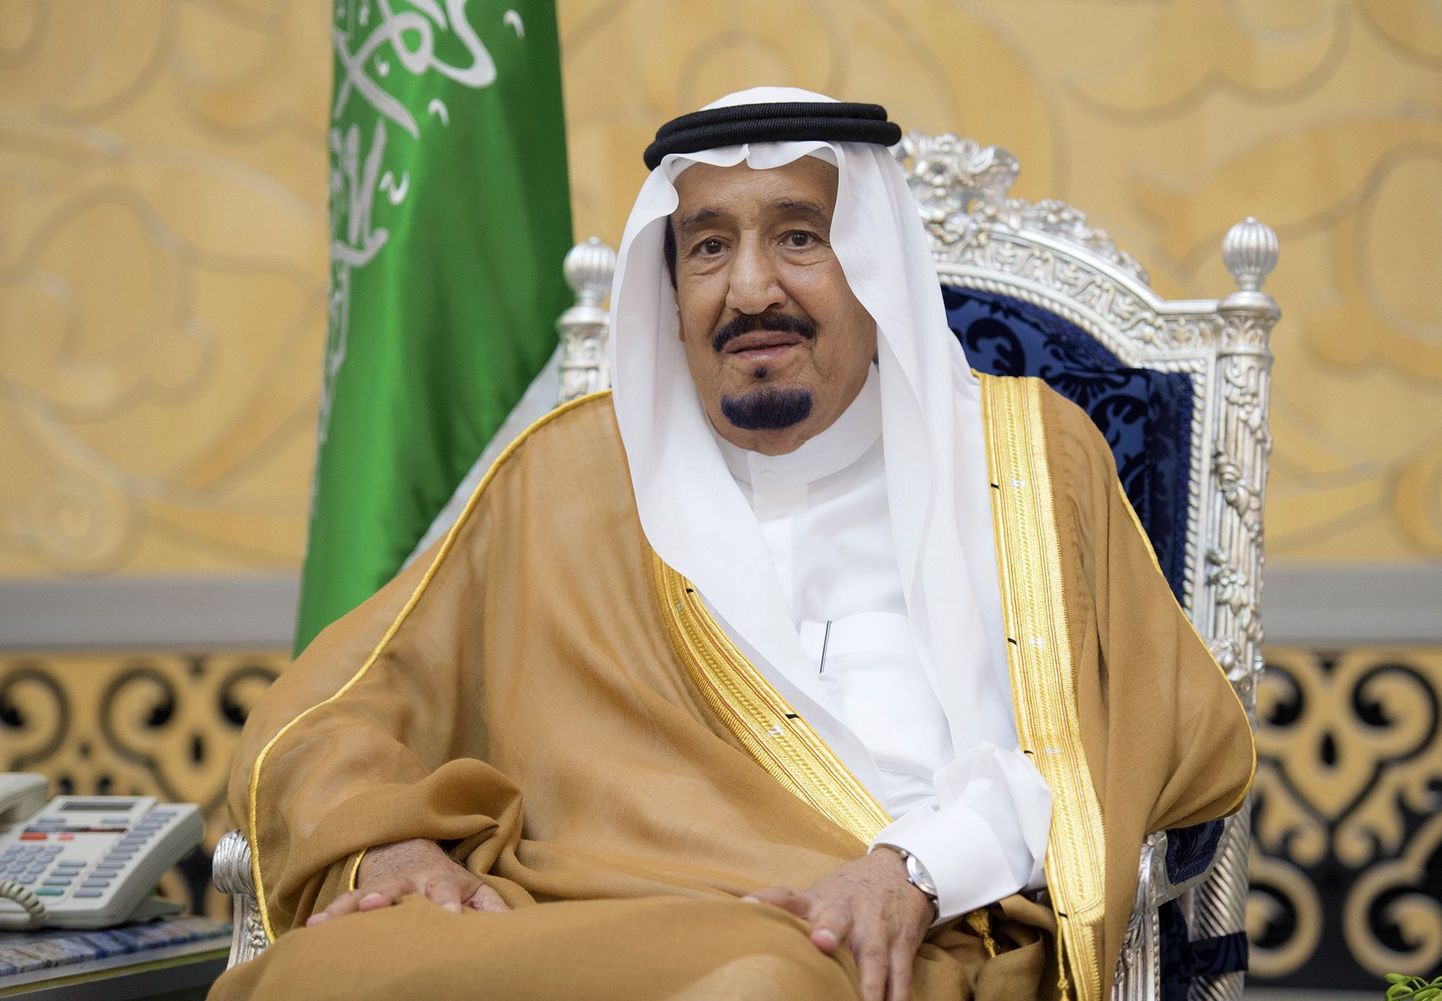 A handout picture provided by the Saudi Royal Palace on August 23, 2017 shows Saudi King Salman (C) sitting at Jeddah airport upon his return from holiday Morocco. / AFP PHOTO / Saudi Royal Palace / BANDAR AL-JALOUD / RESTRICTED TO EDITORIAL USE - MANDATORY CREDIT "AFP PHOTO / SAUDI ROYAL PALACE / BANDOUR AL-JALOUD" - NO MARKETING NO ADVERTISING CAMPAIGNS - DISTRIBUTED AS A SERVICE TO CLIENTS